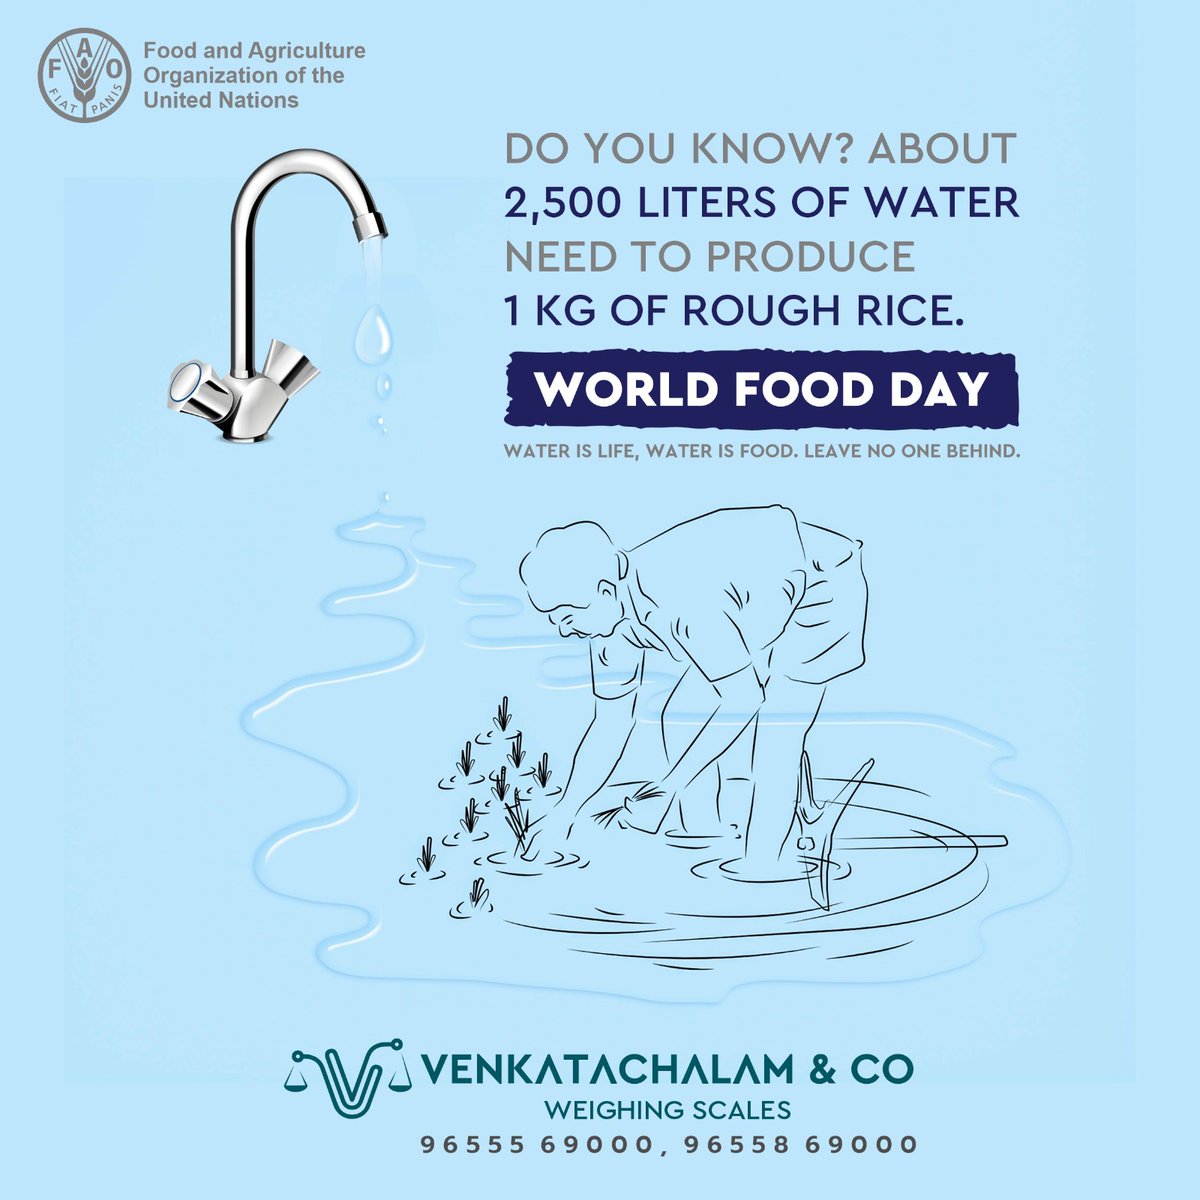 Do you know?
About 2,500 liters of water need to produce 1kg of rough rice.

Water is life, water is food. 
Leave no one behind.

DON'T WASTE WATER!
#worldfoodday #oct16 #waterislife #dontwastewater #foodday #water #venkatachalam #prrestigescale #Thulam #nirai #scangle #Yesweigh